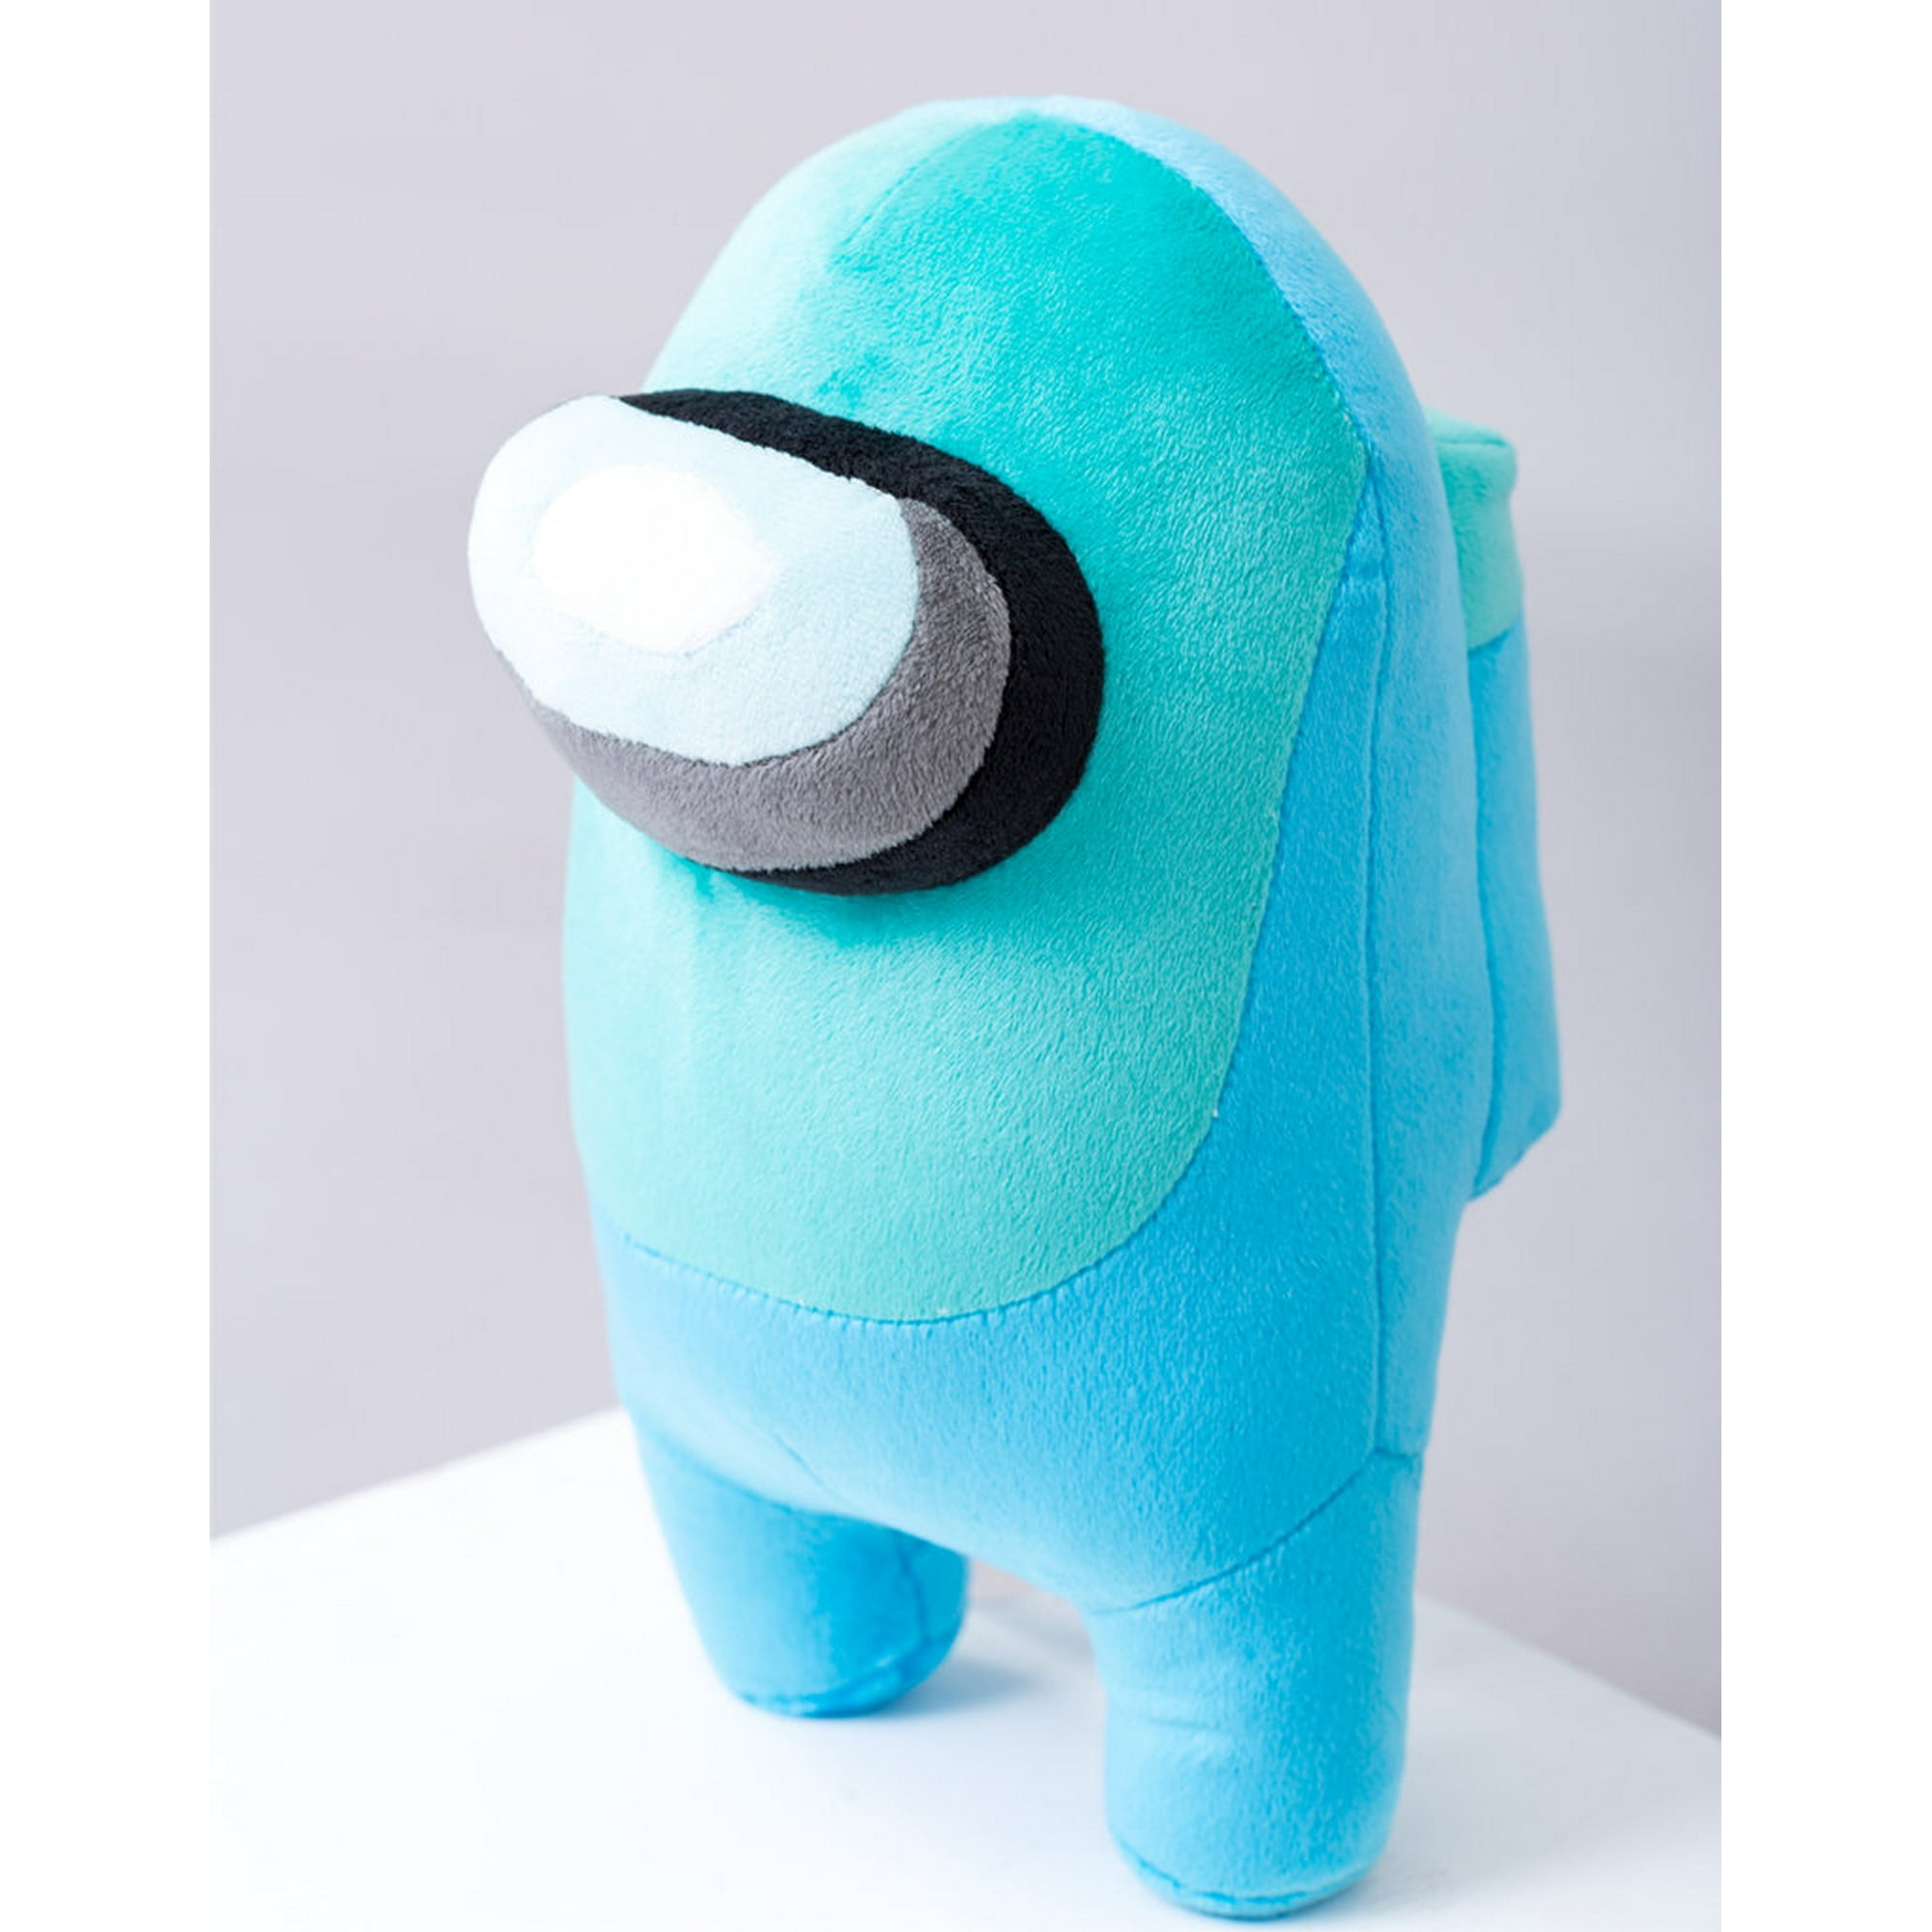 Featured image of post Imposter Plush Among Us Stuffed Animal Shipping fee we are in yangzhou city jiangsu province which is the plush toy manufacturing center 3 hours drive from shanghai